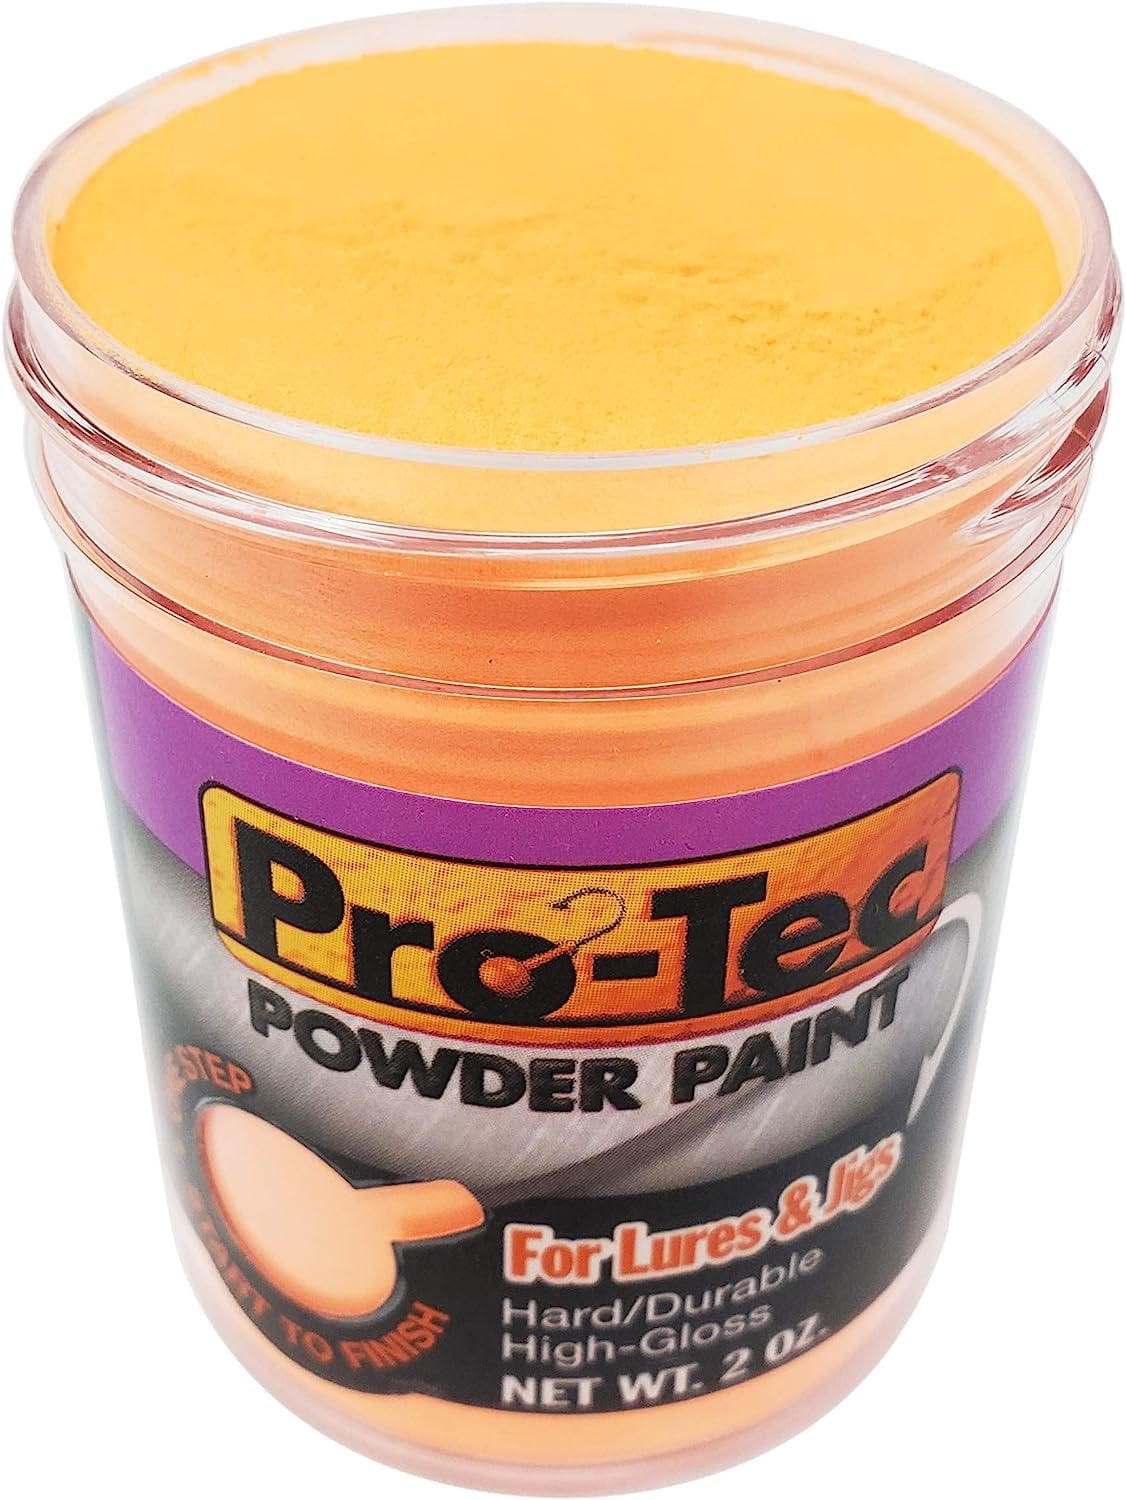 Pro-Tec Jigs and Lures Powder Paints, Jig Head Fishing Paint